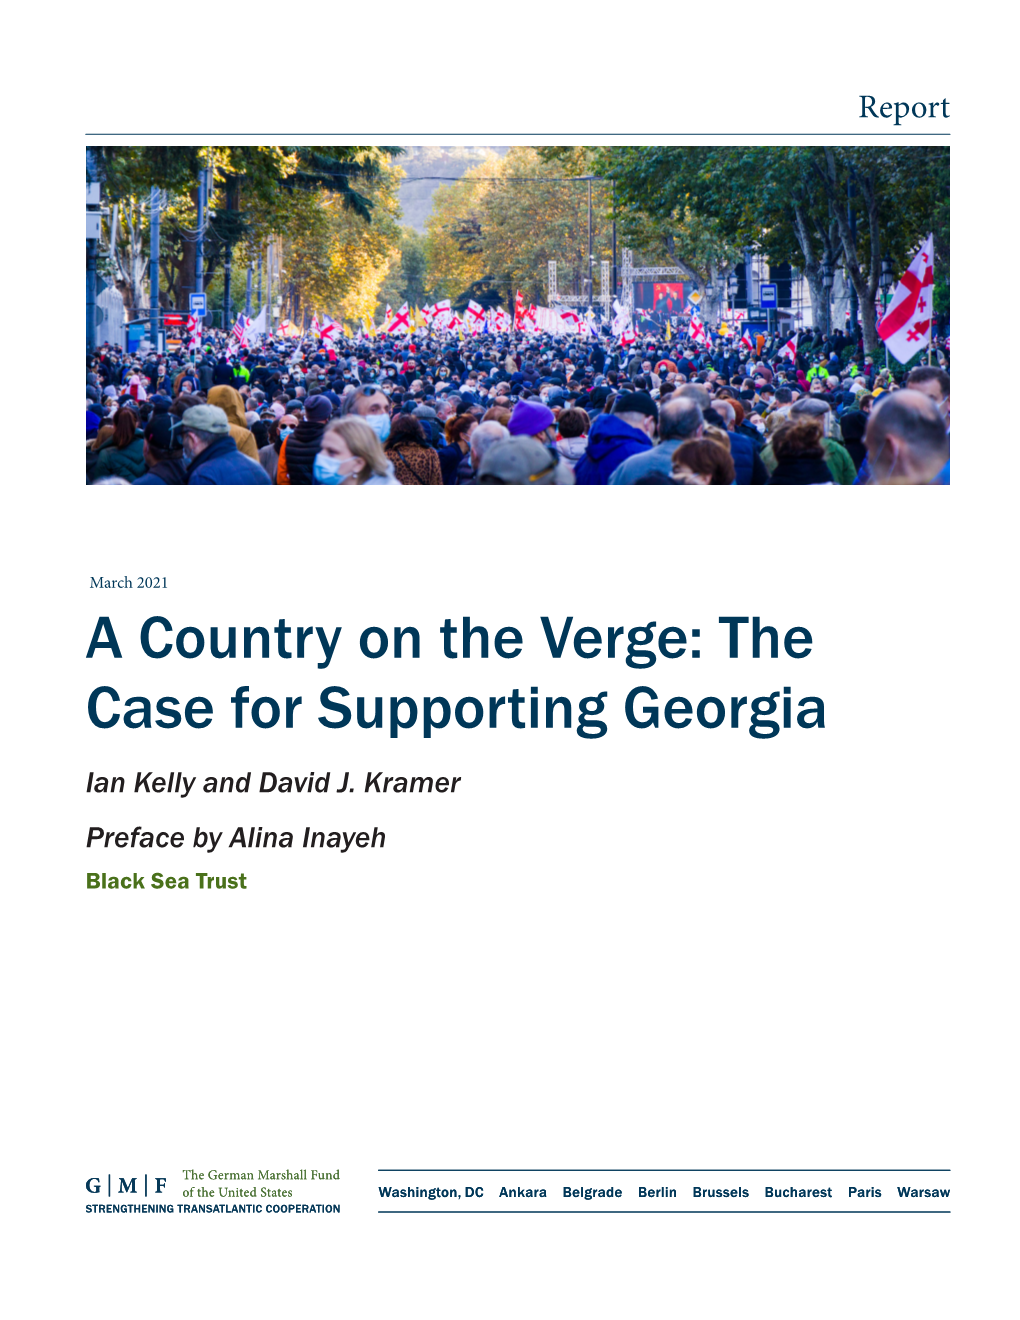 A Country on the Verge: the Case for Supporting Georgia Ian Kelly and David J